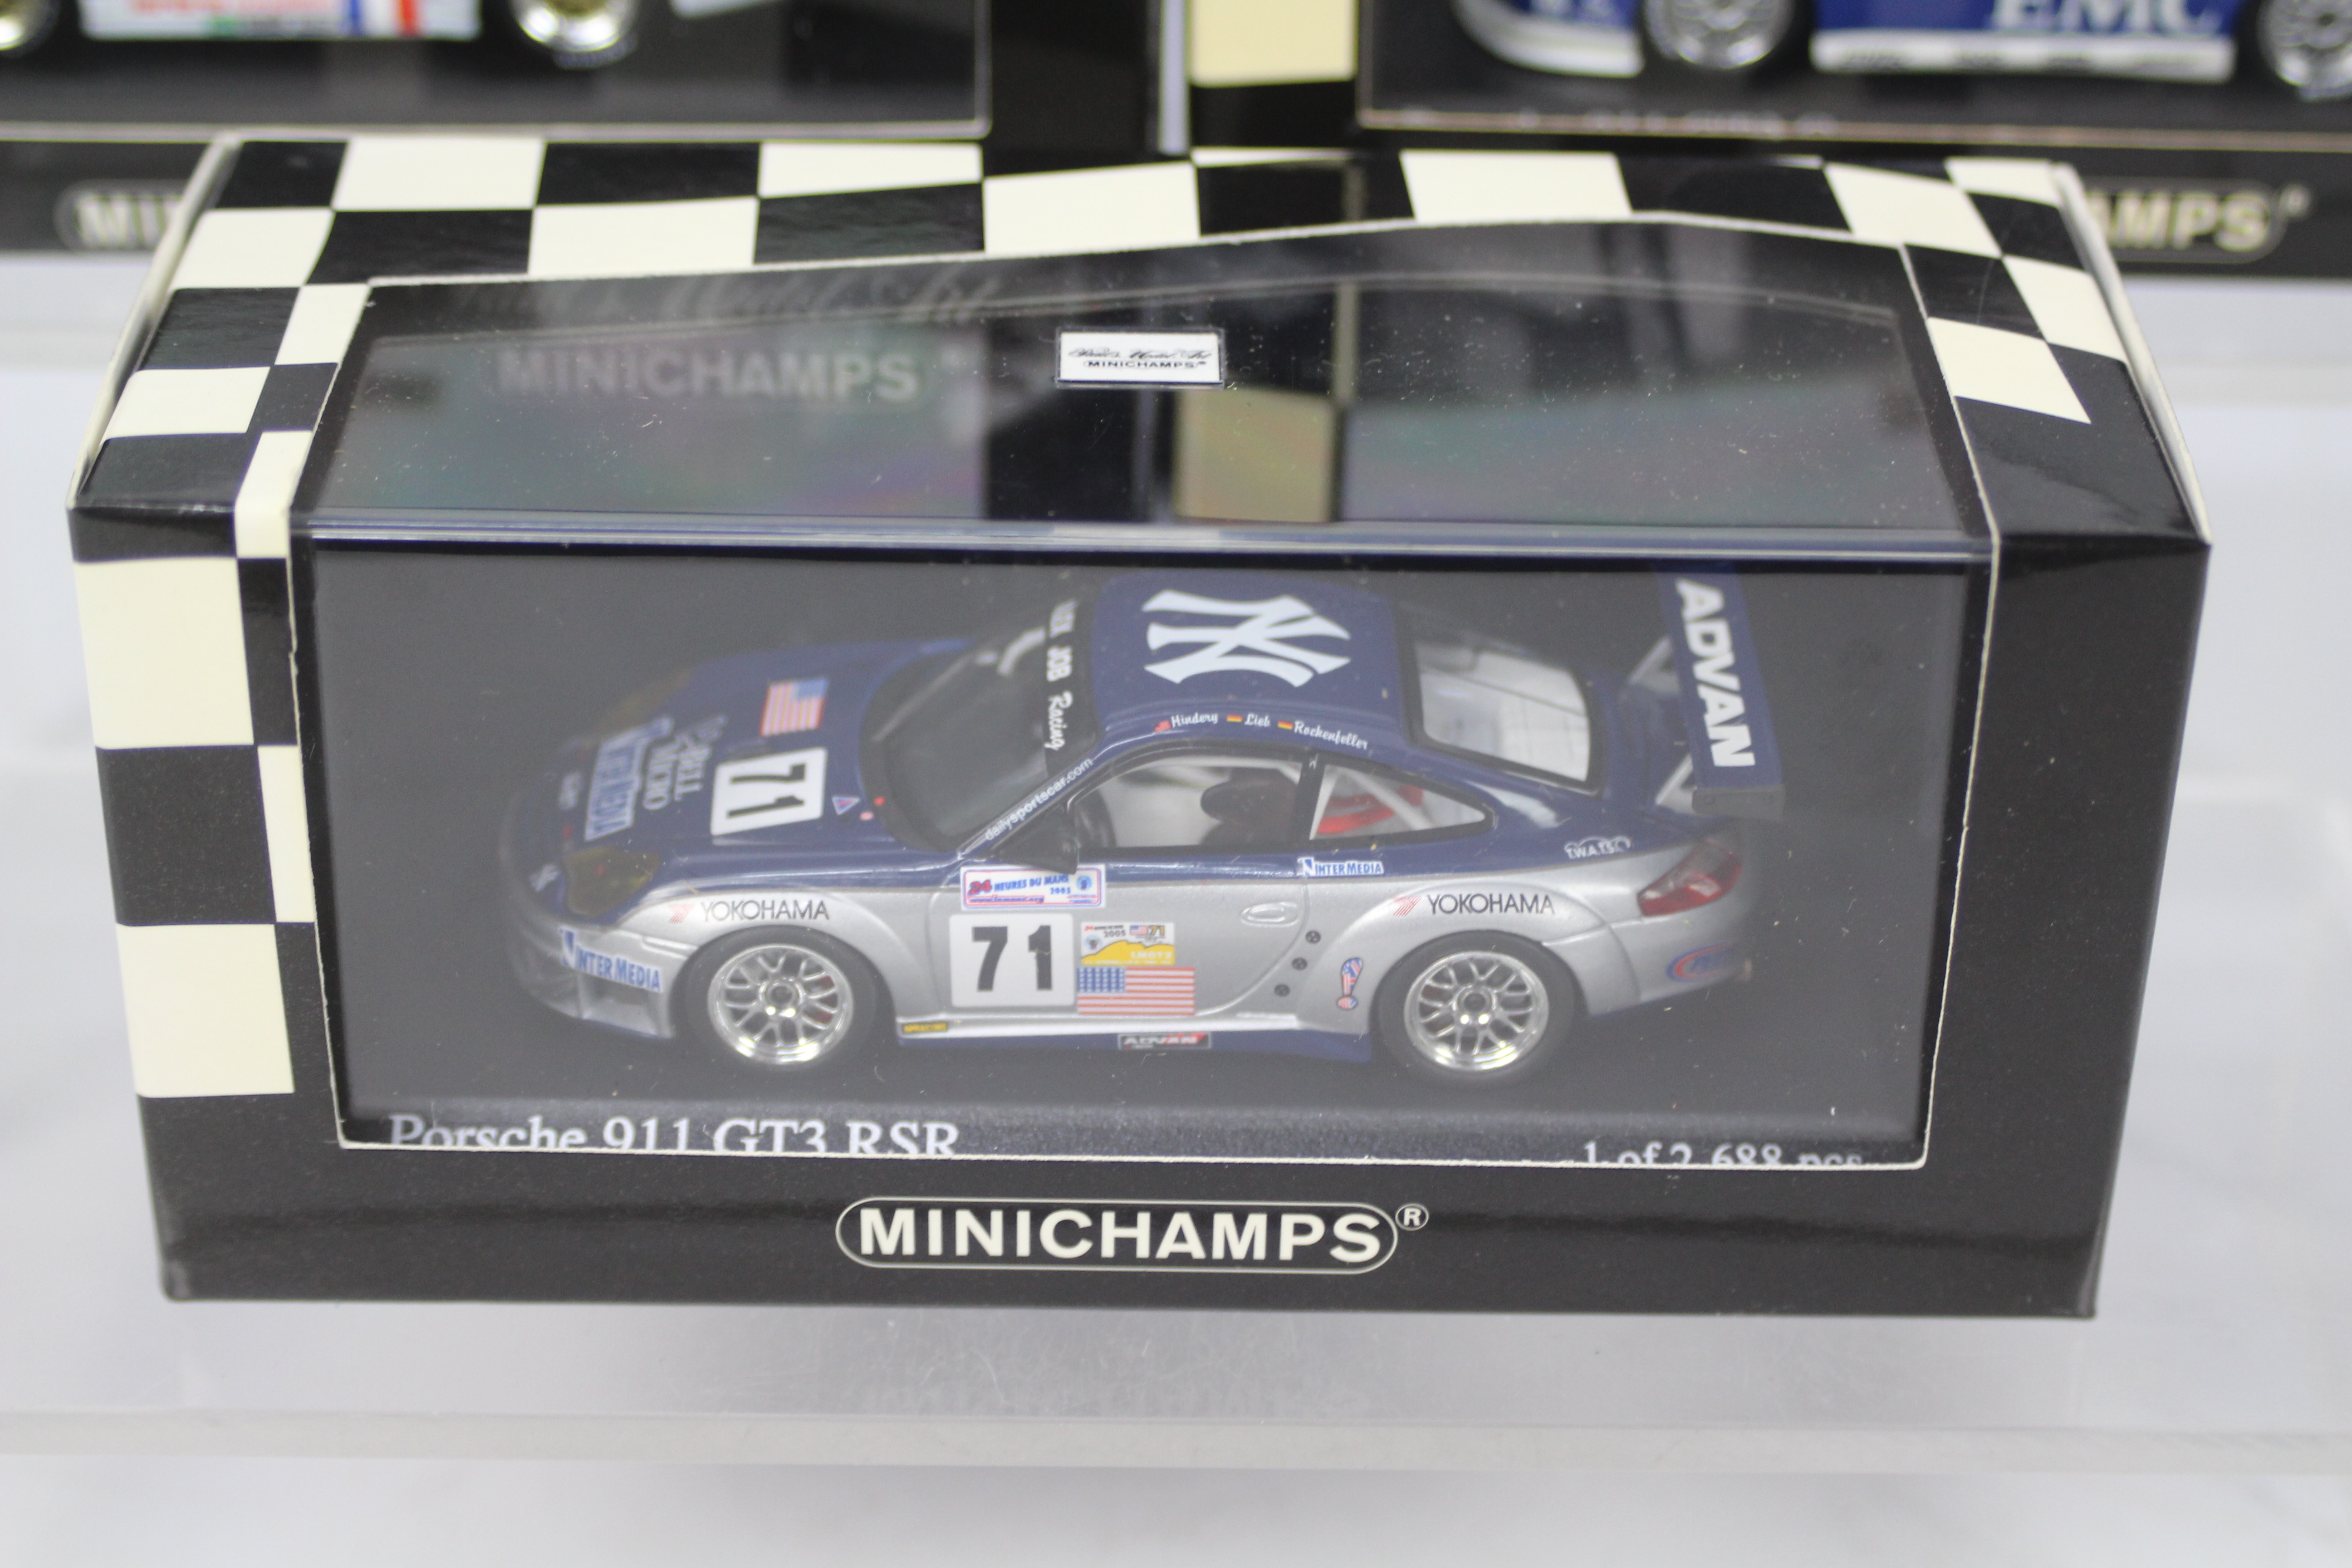 Minichamps - 3 x limited edition Porsche 911 models in 1:43 scale, a GT2 Evo, - Image 2 of 4